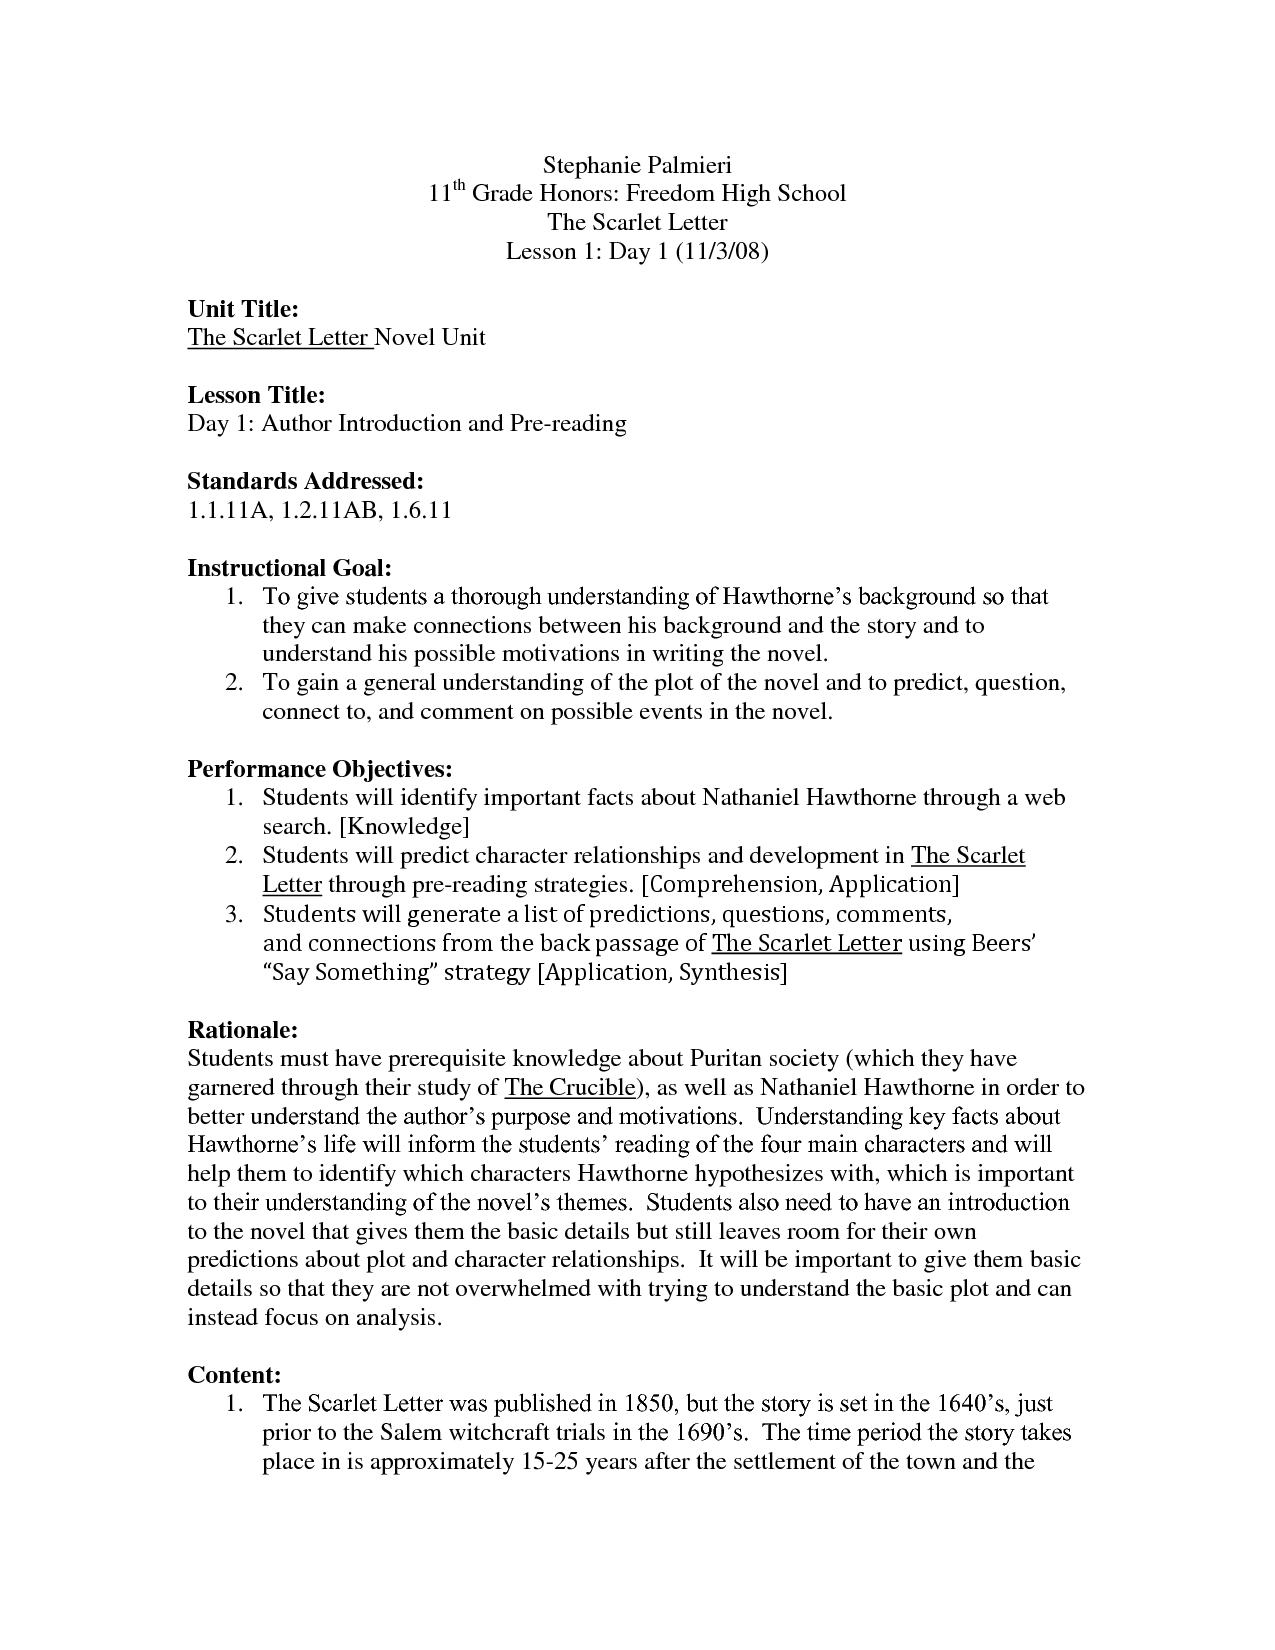 Cover Letter To Judge Debandje intended for sizing 1275 X 1650